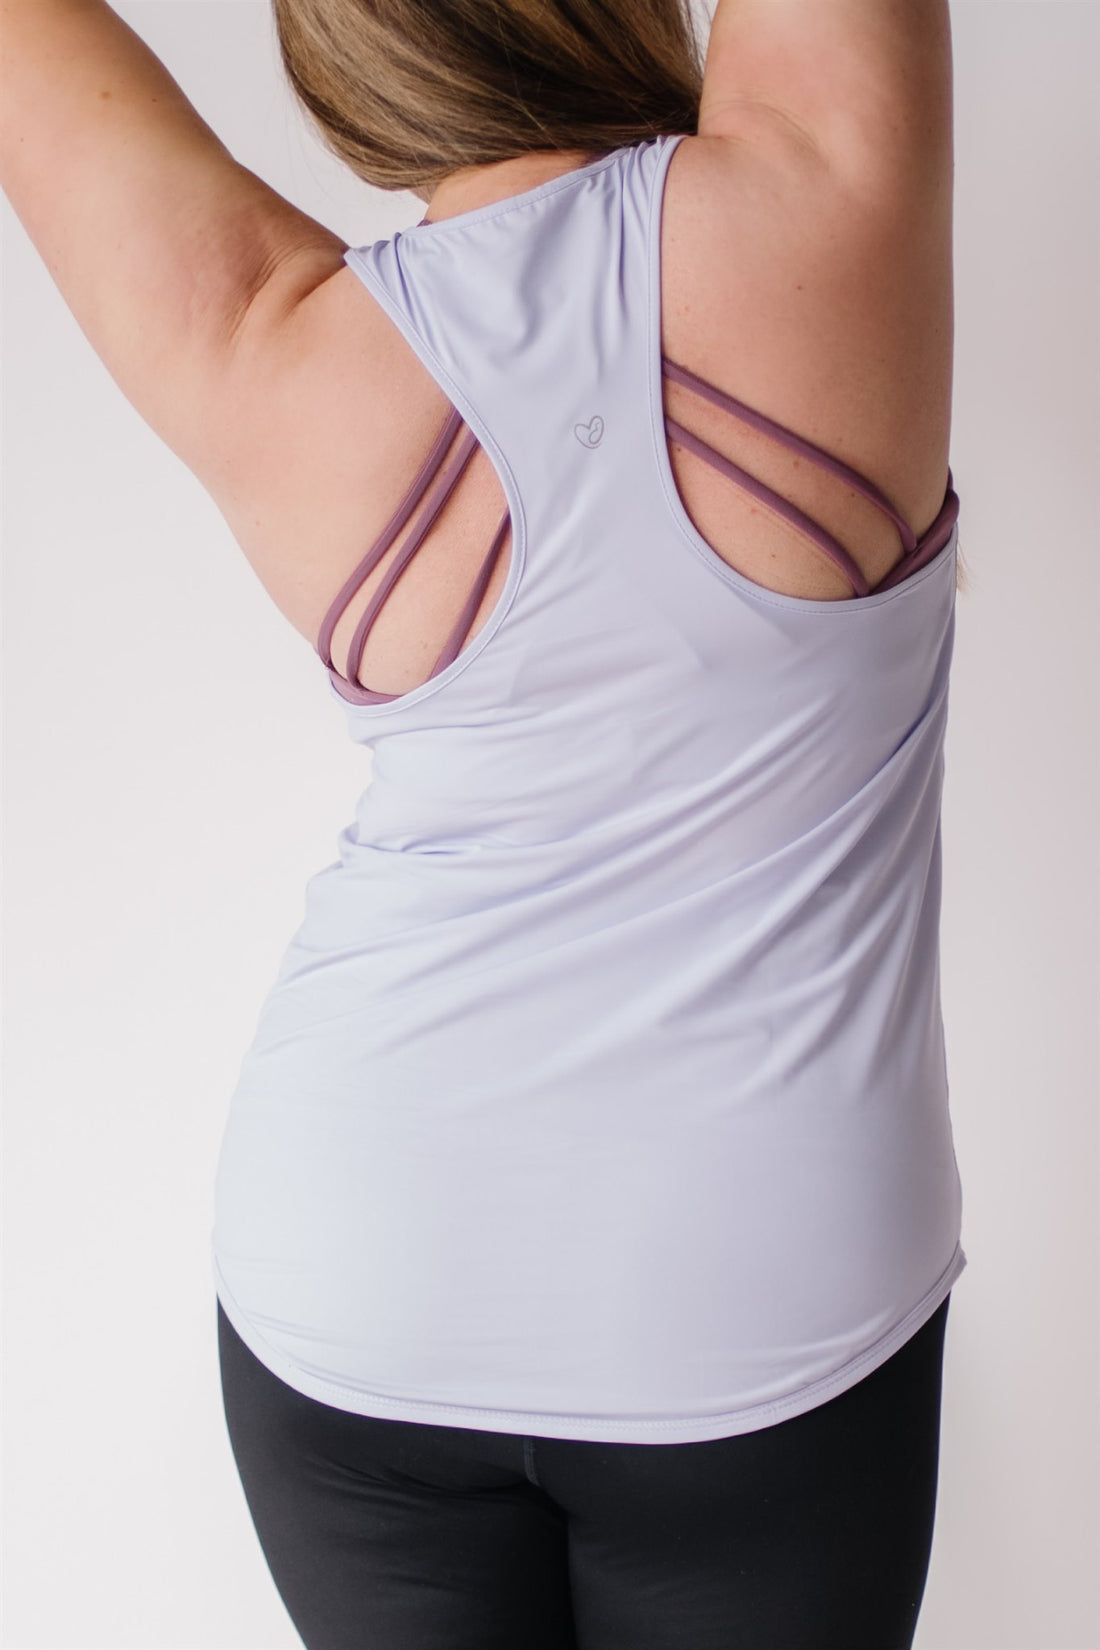 Woman showing racerback of long maternity tank top in lavender.